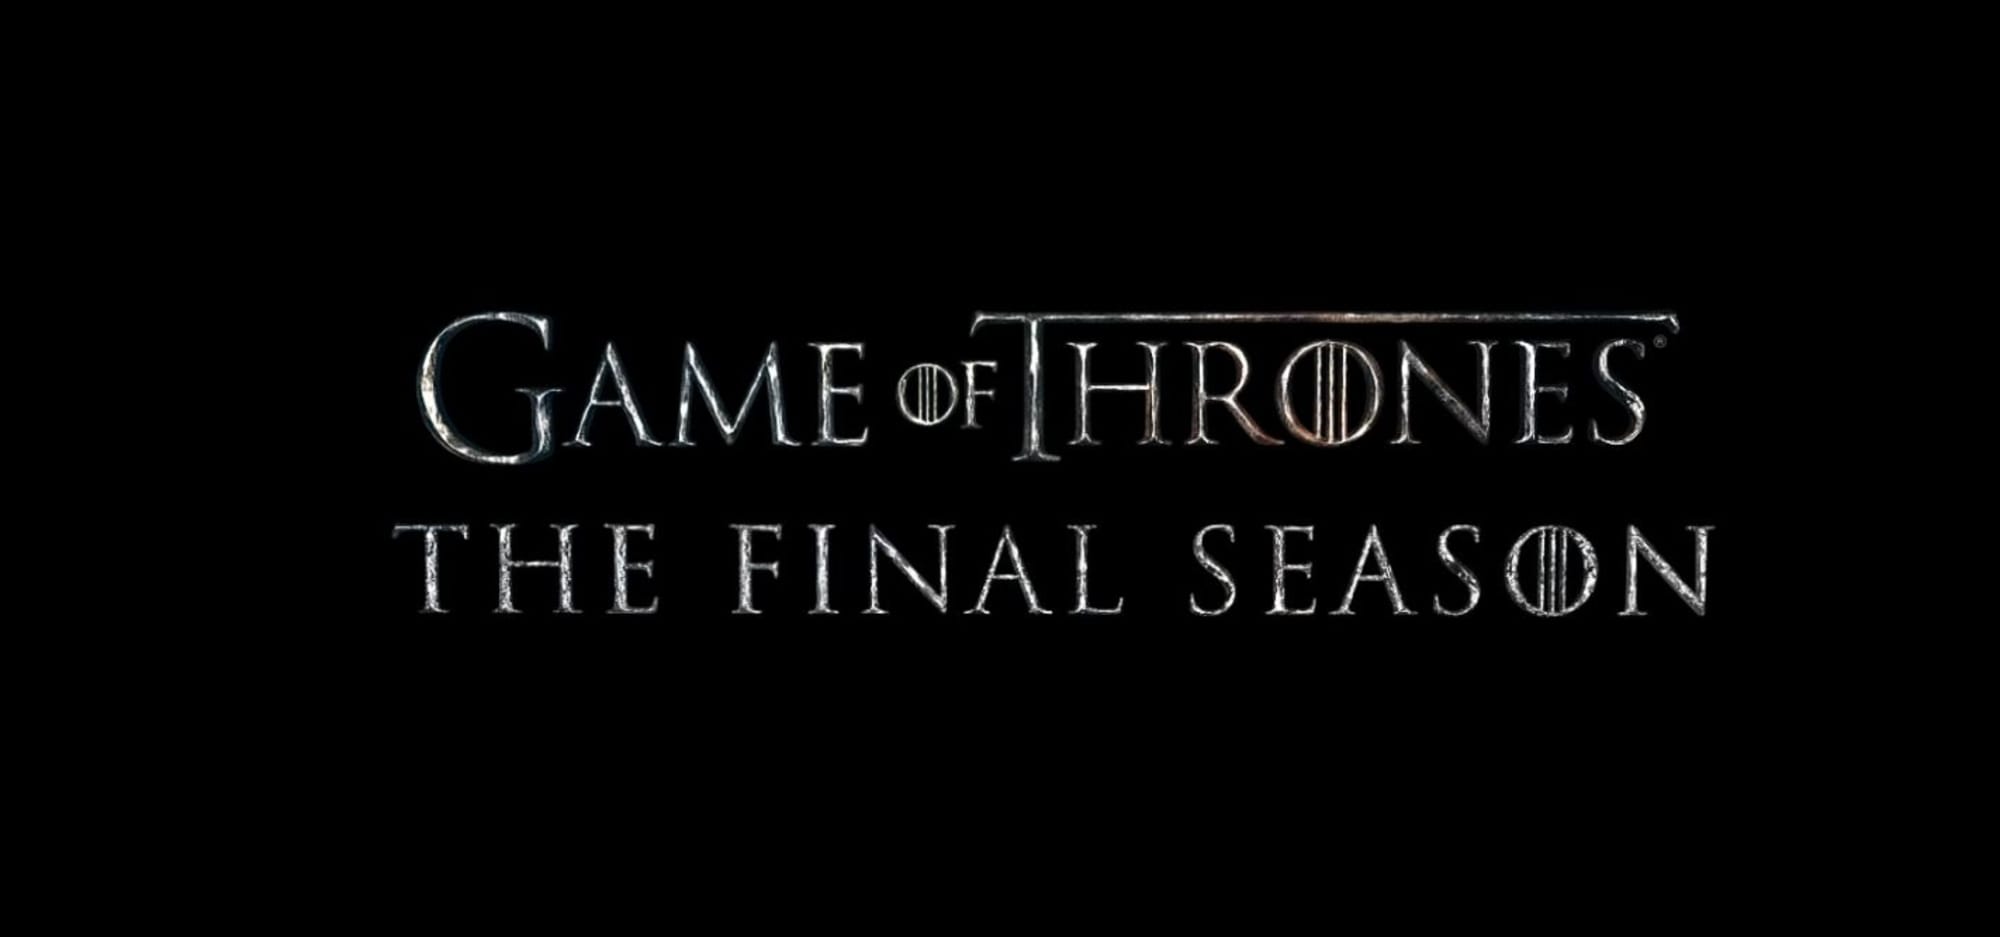 microsoft word 2010 game of thrones font